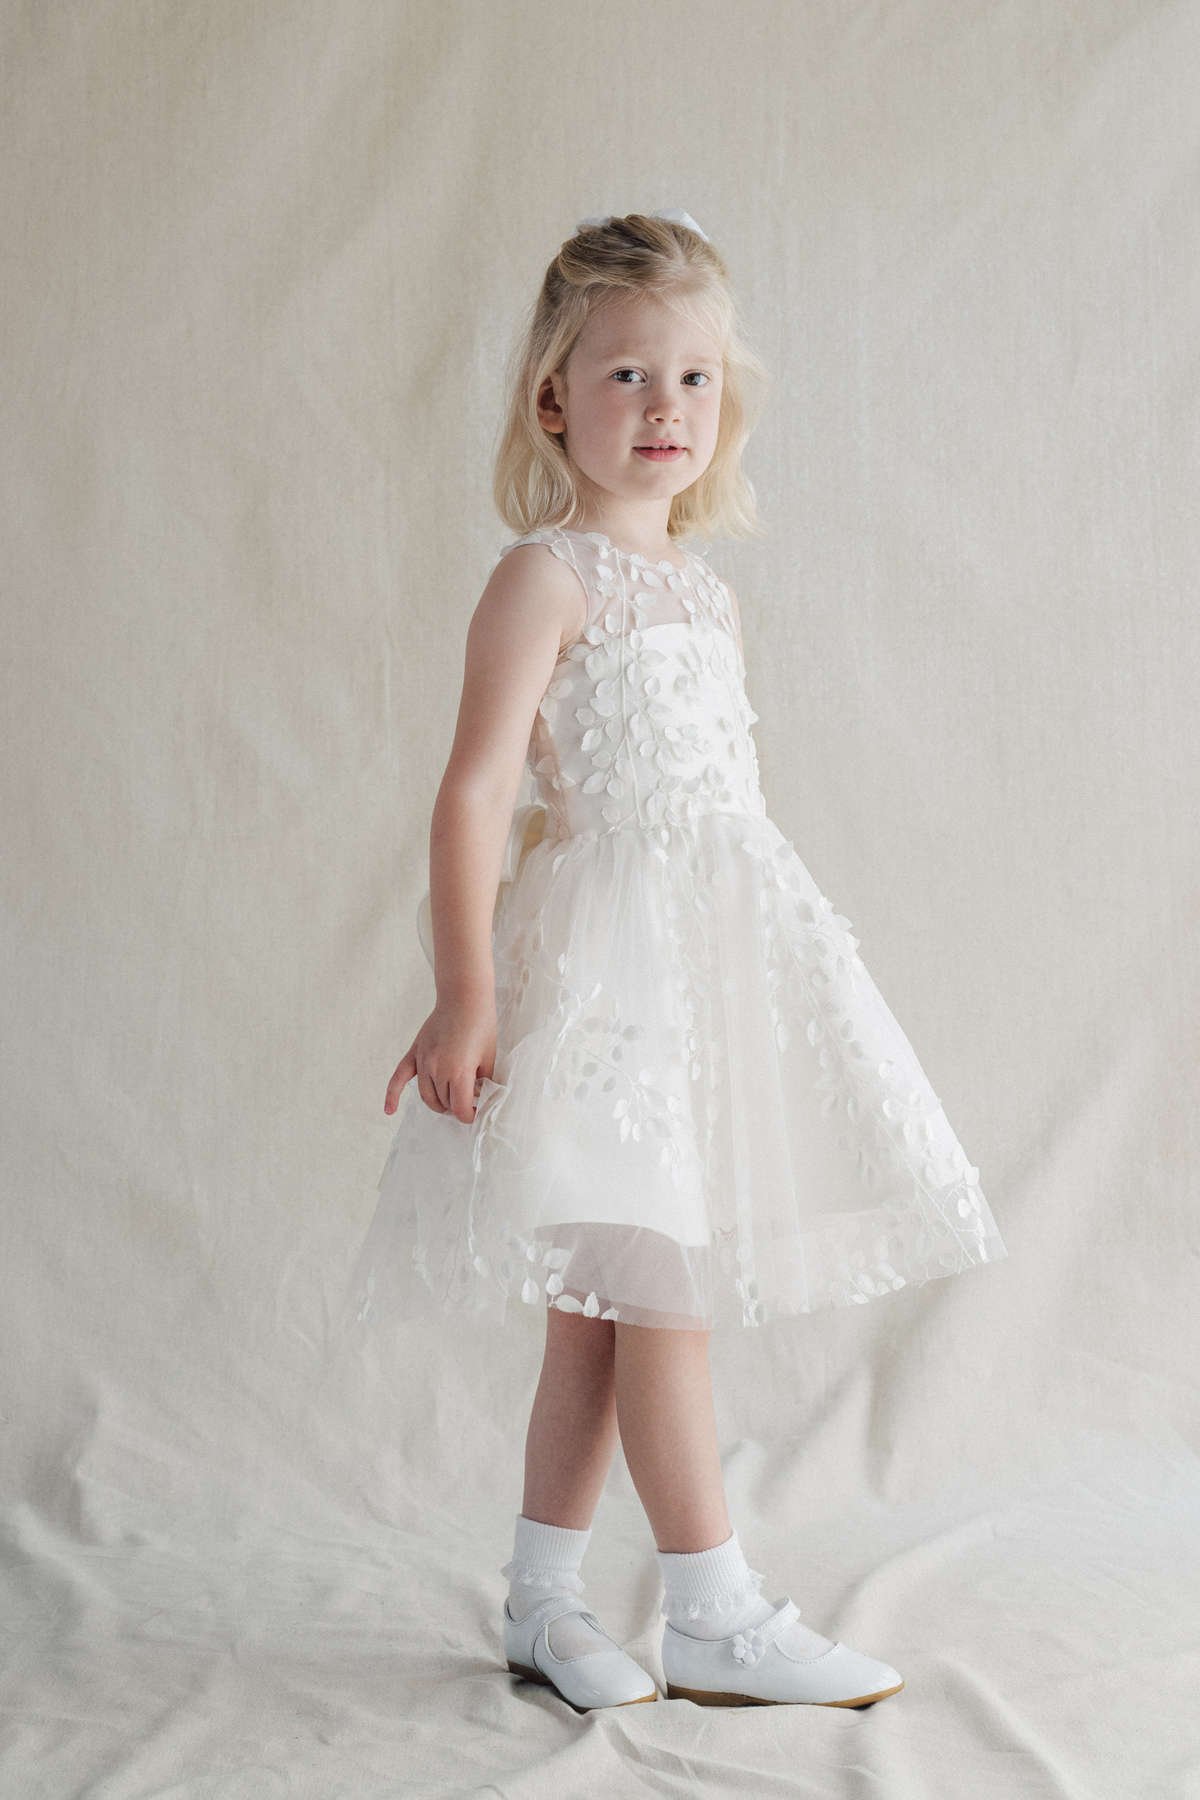 Childrens Wedding Dresses White Ball Gown Gowns For Girls